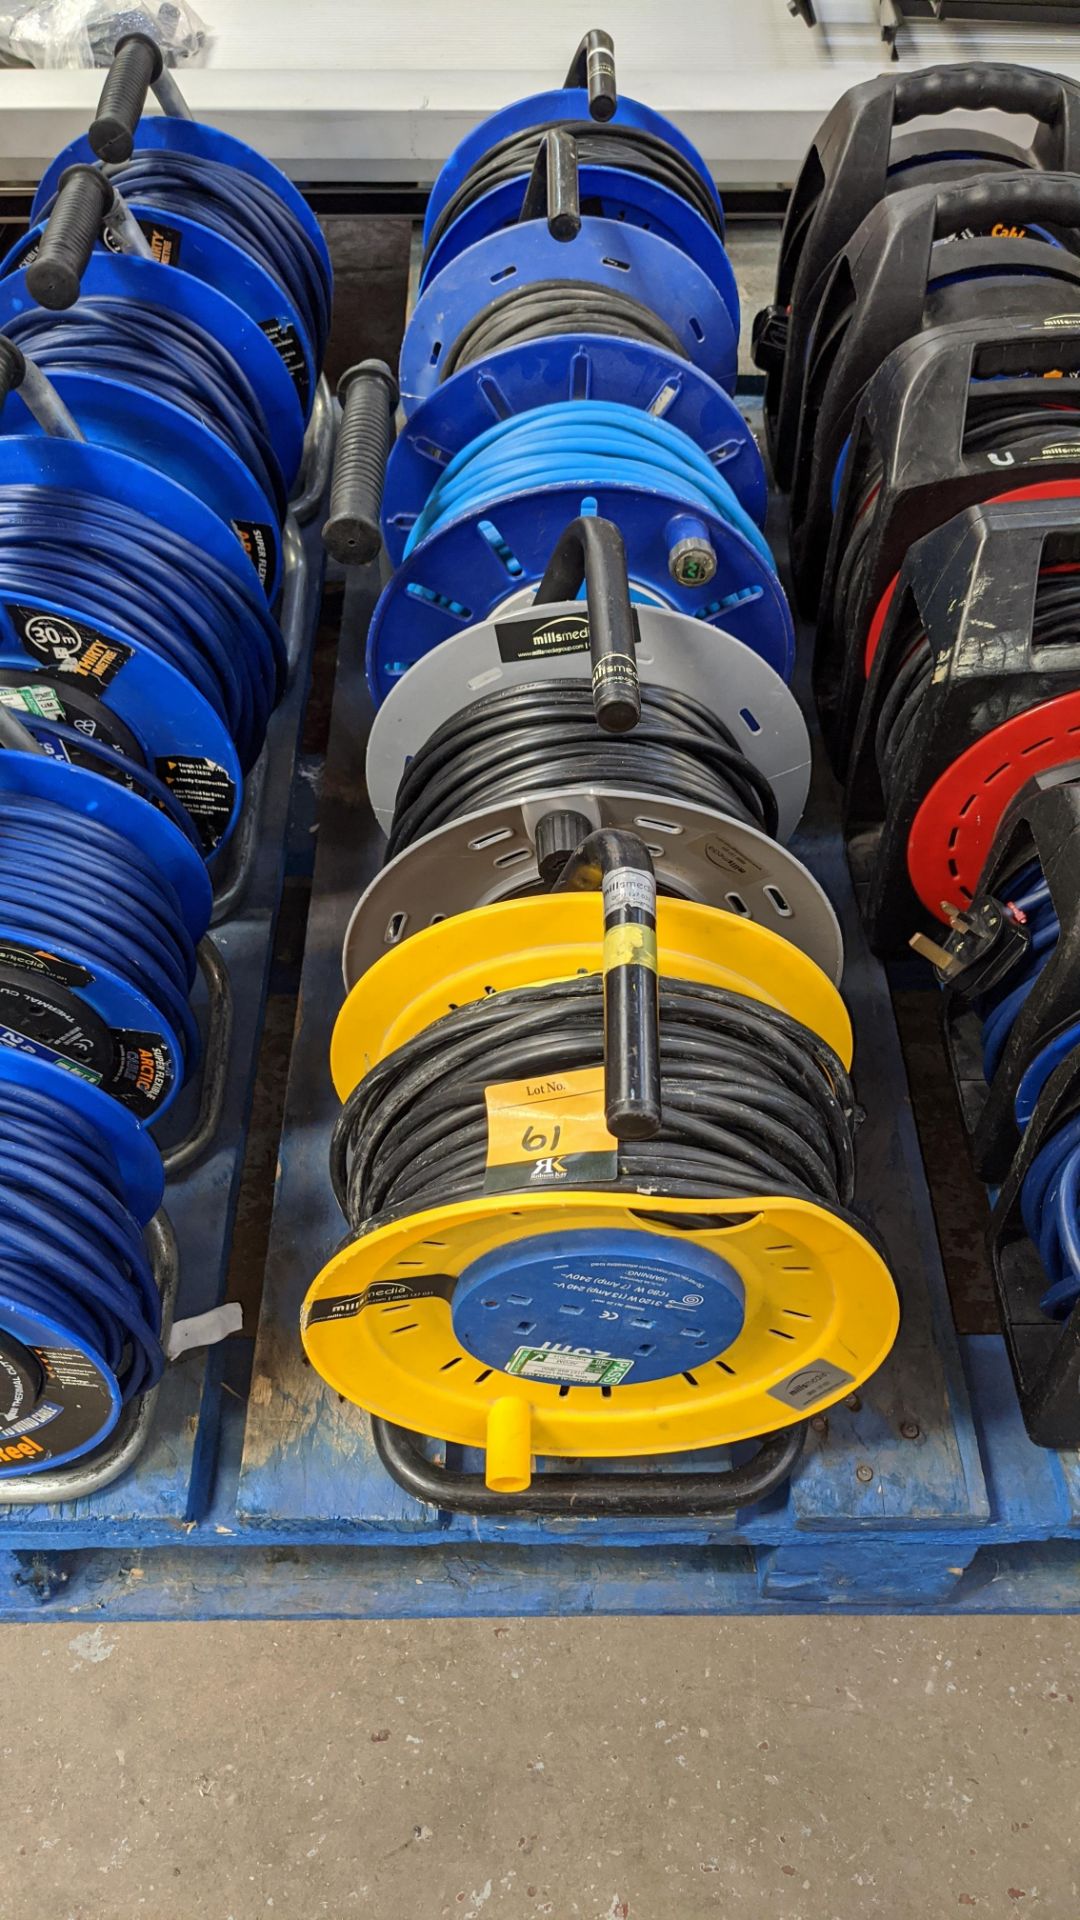 5 off 230/240V multi socket cable extension reels Lots 51 - 480 comprise the total assets of Mills